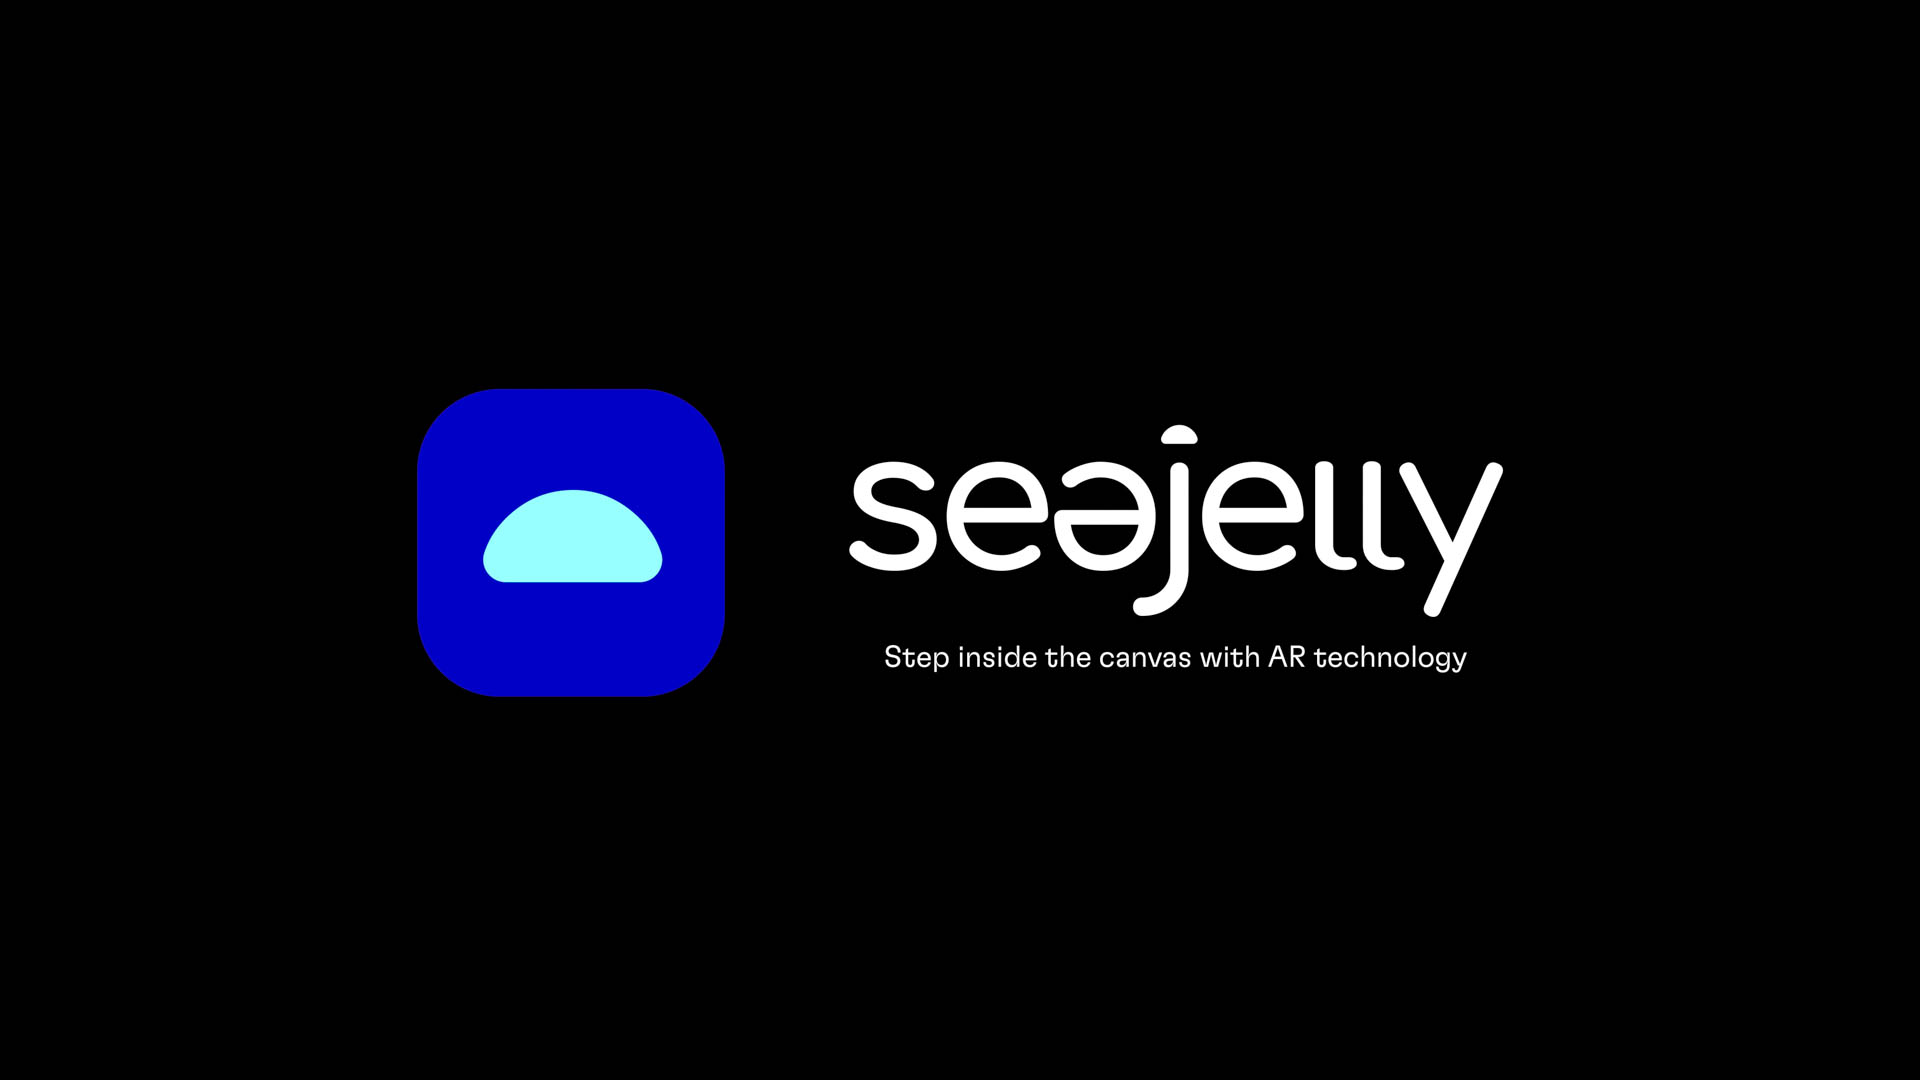 design for an app called Seajelly